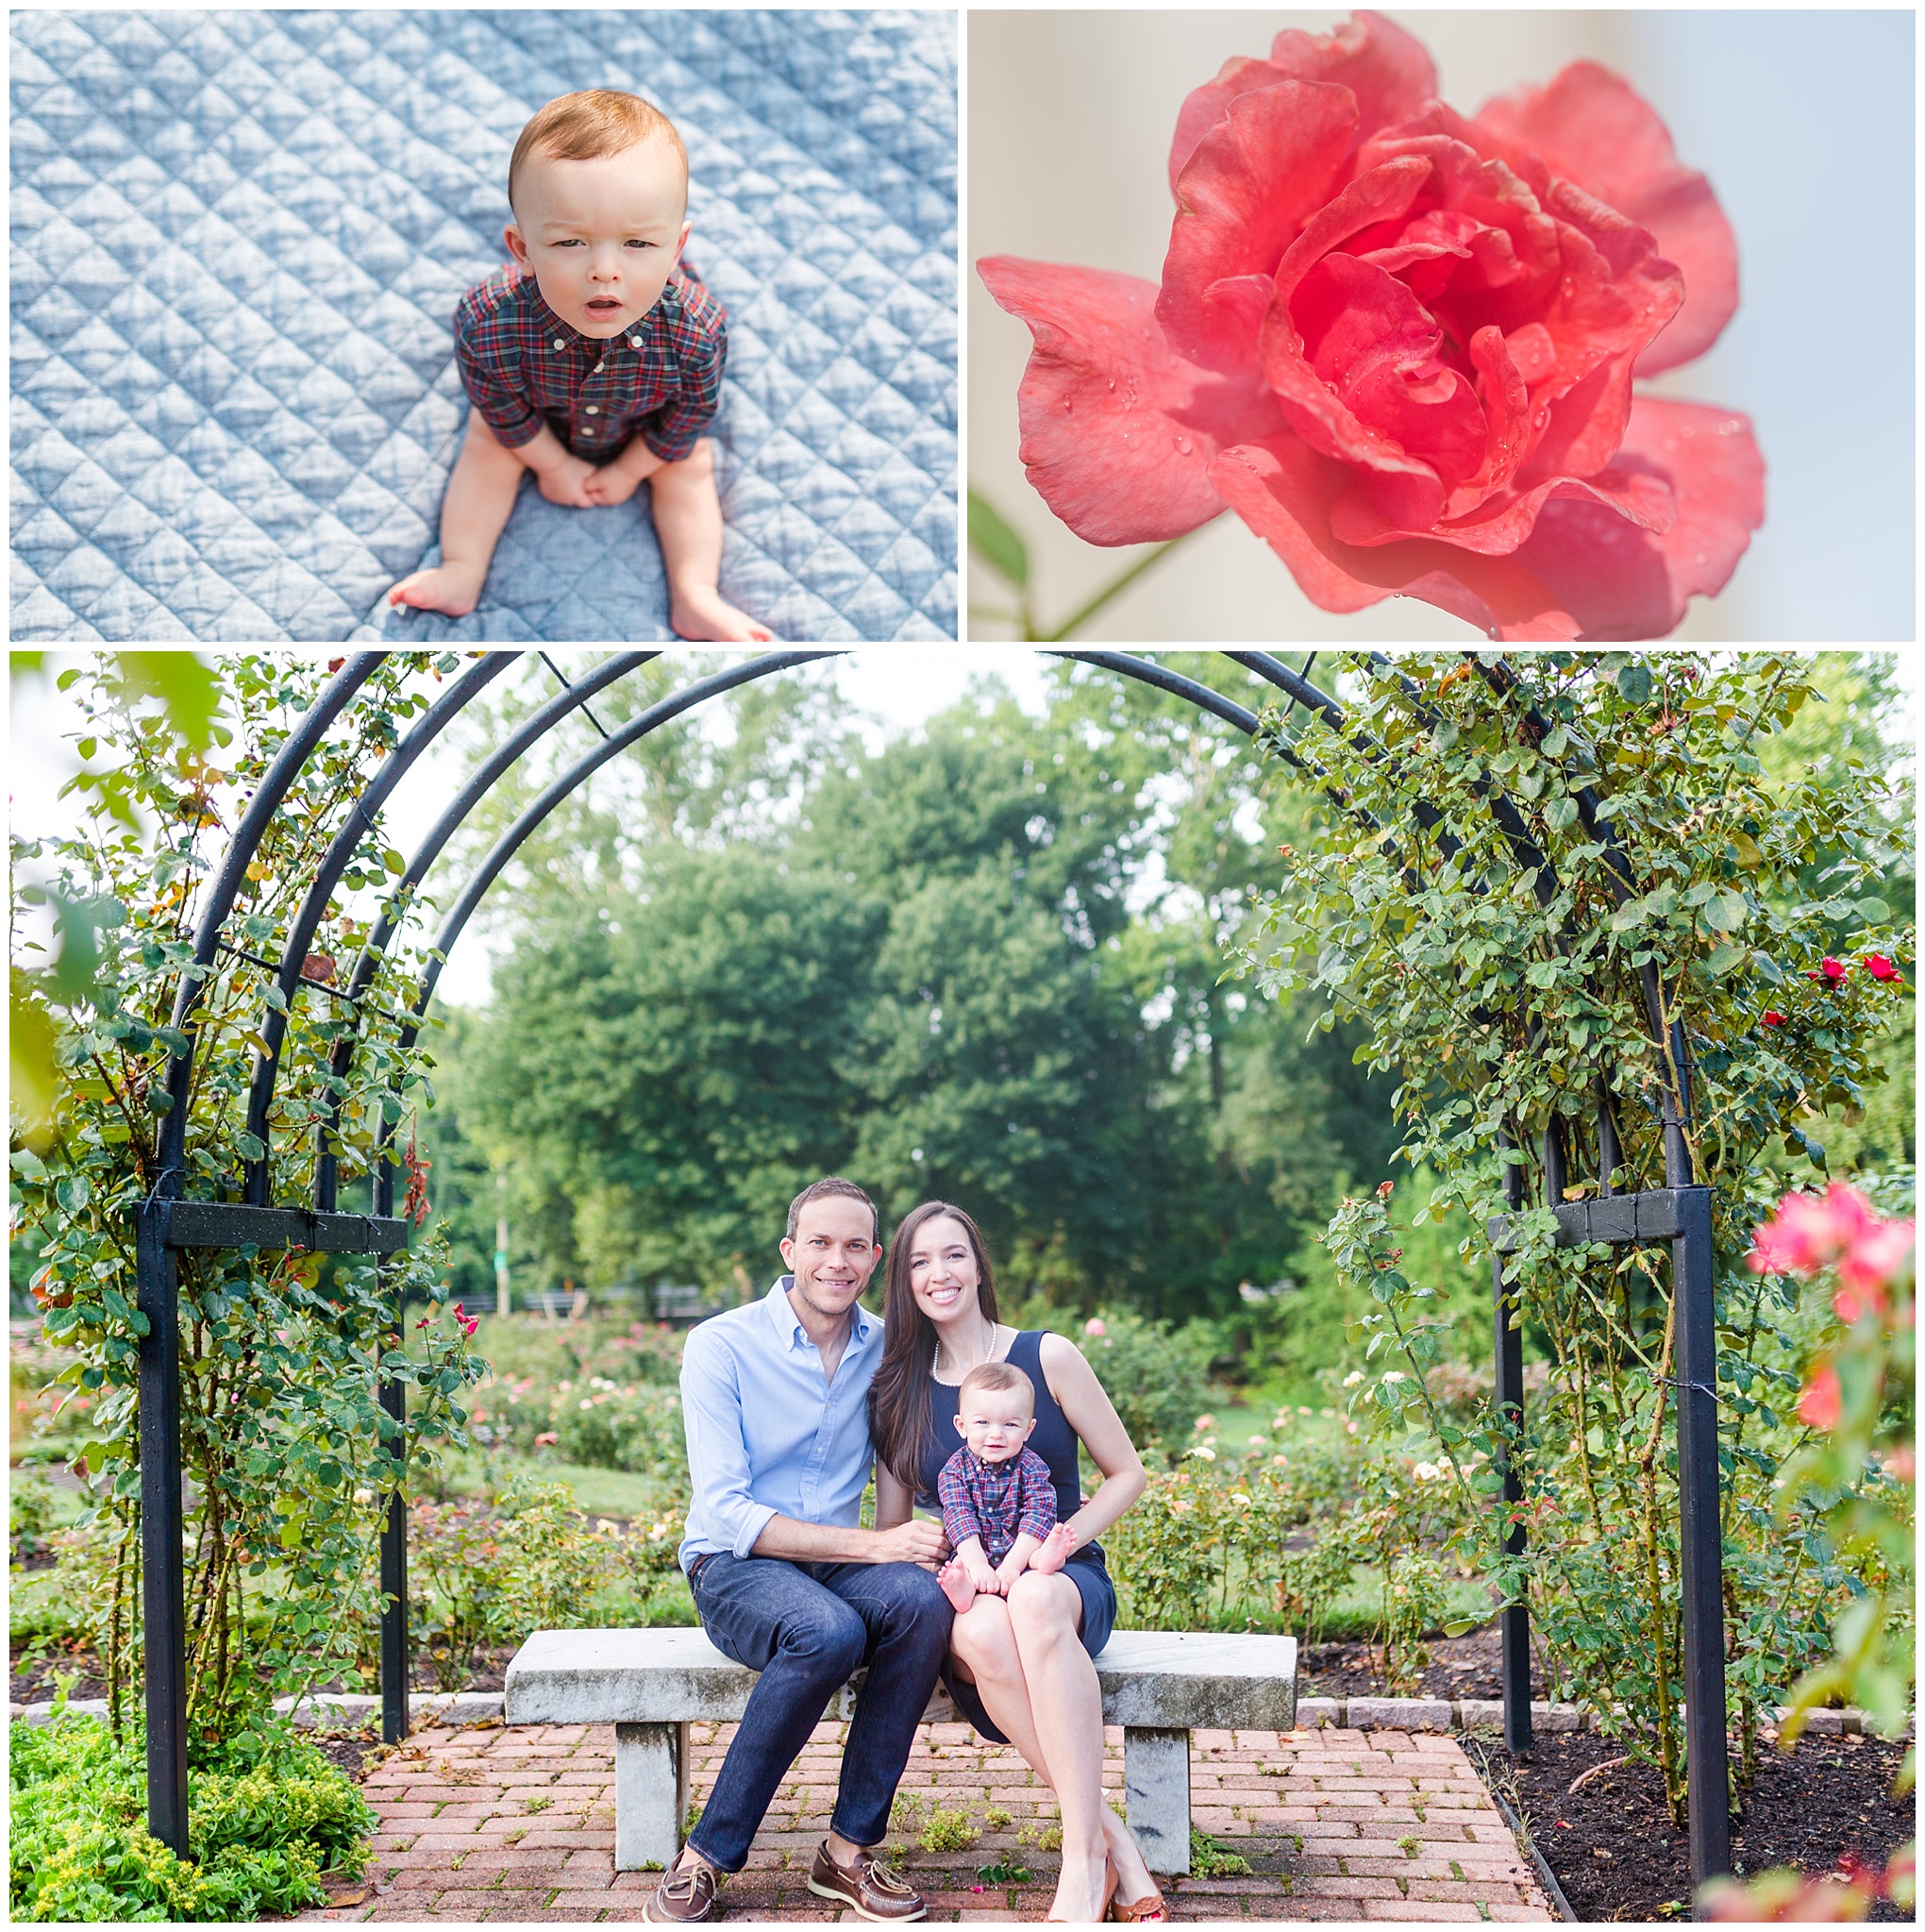 Bon Air Memorial Rose Garden family photos, family of three, garden photos, archway , family portraits, seated portraits, laughing baby, roses, pink roses